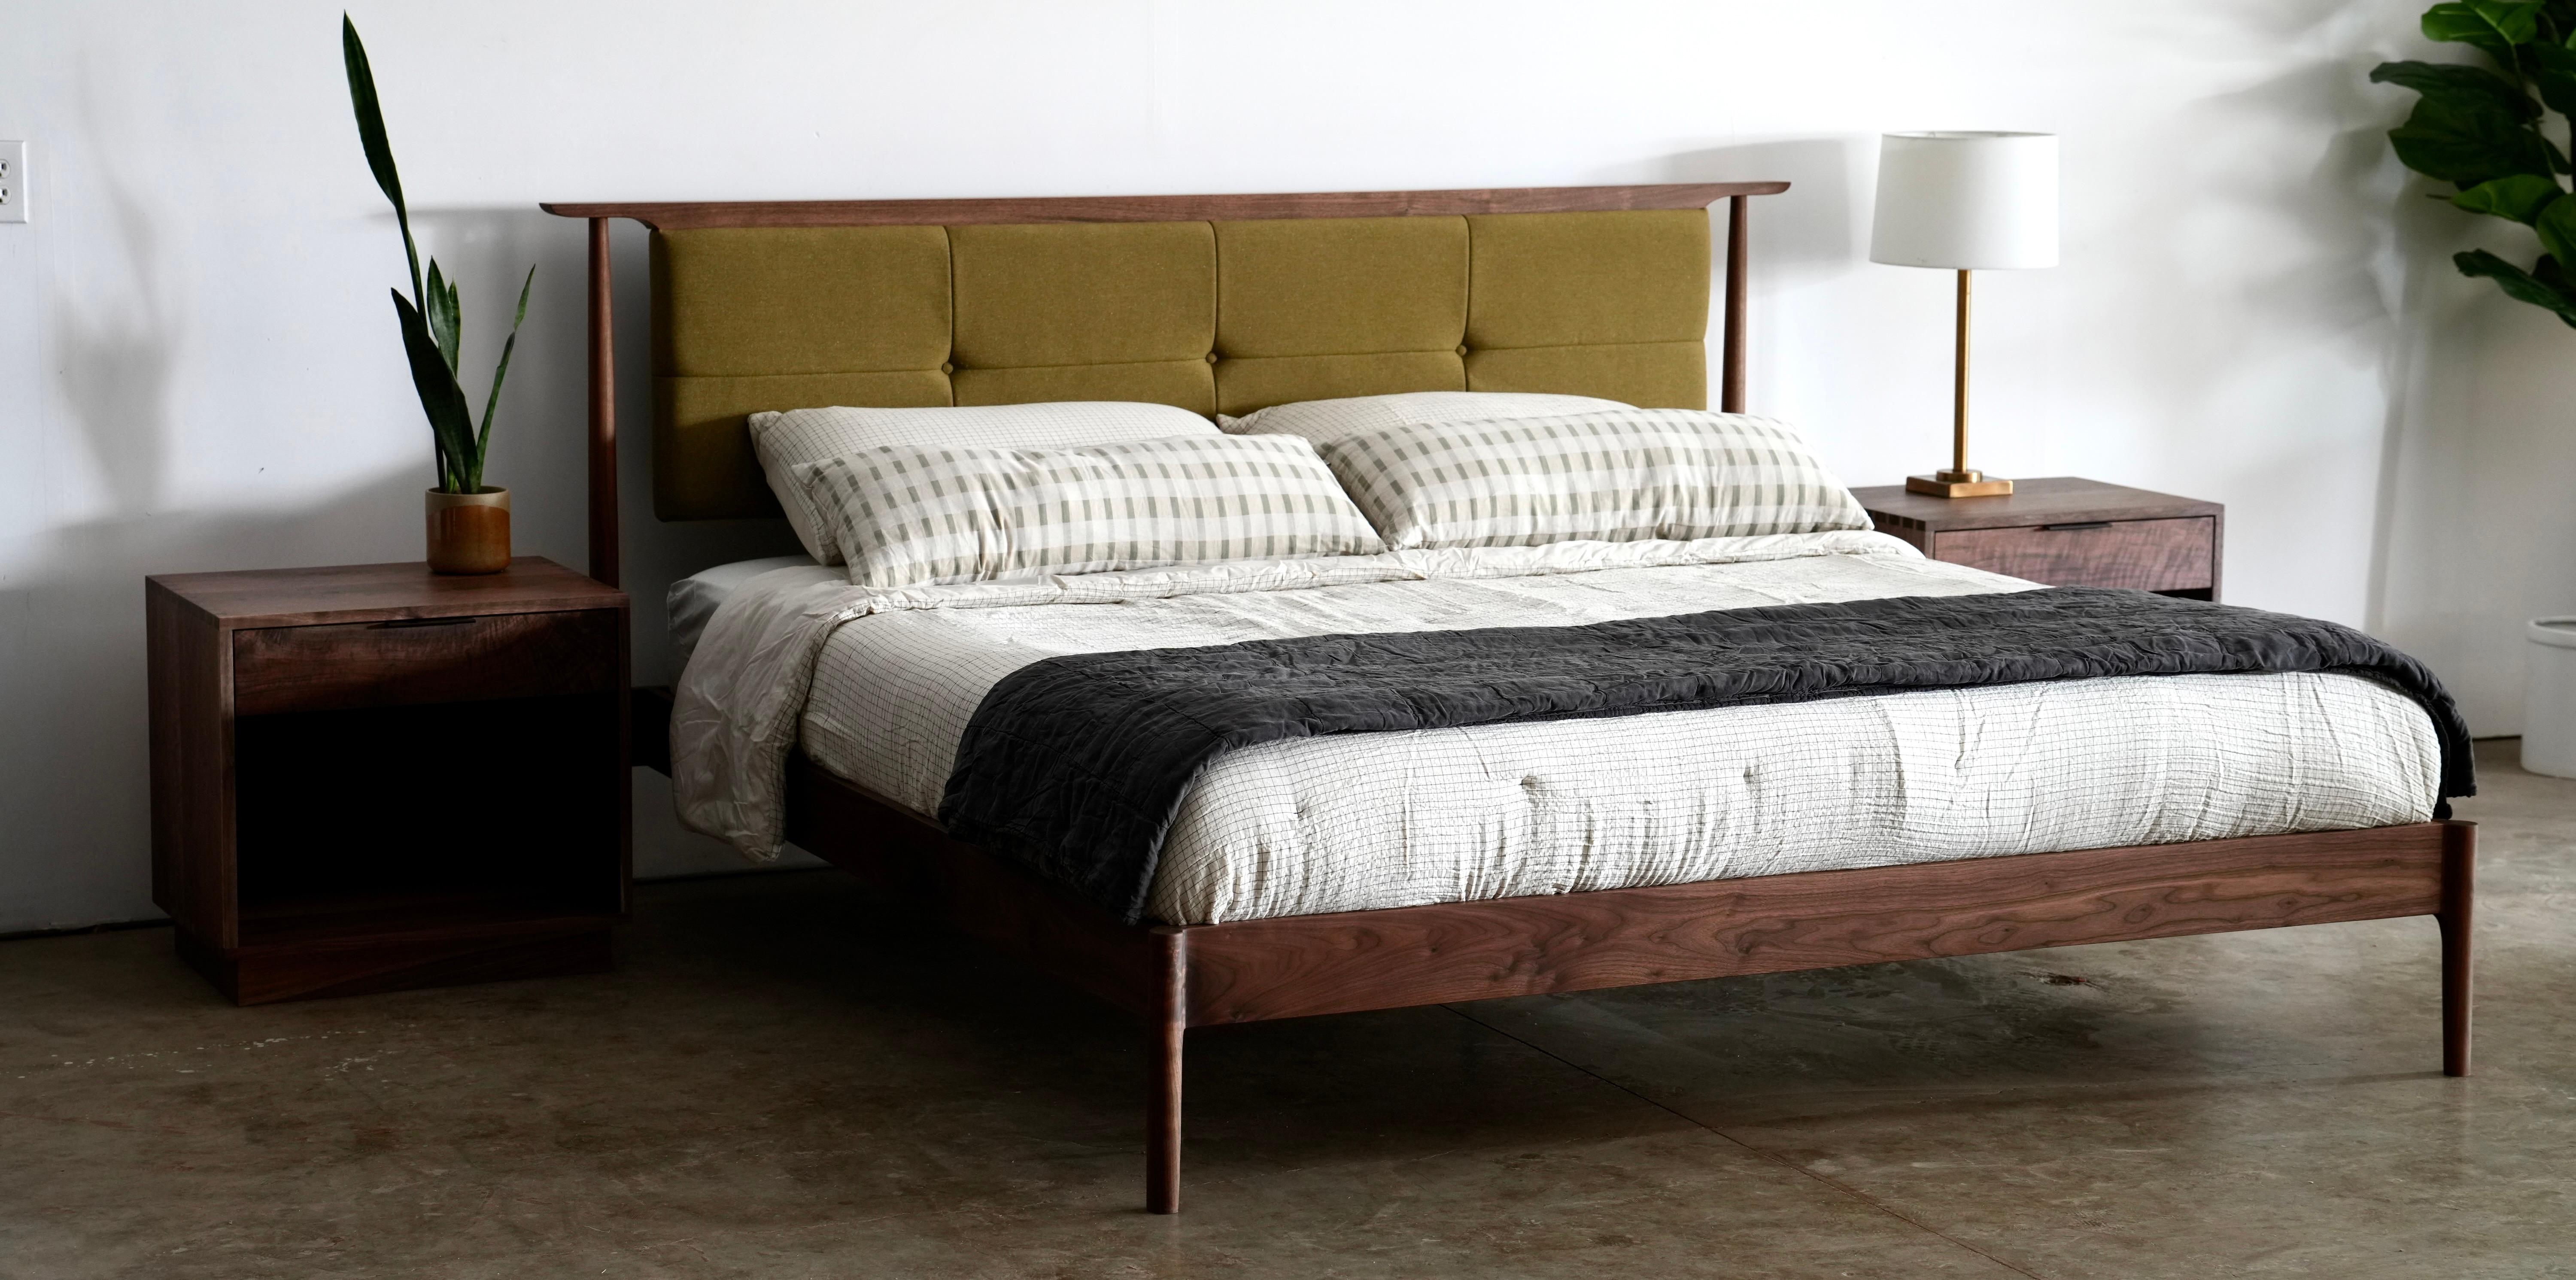 Walnut Mid Century Modern Platform Bed With Upholstered Headboard For Sale